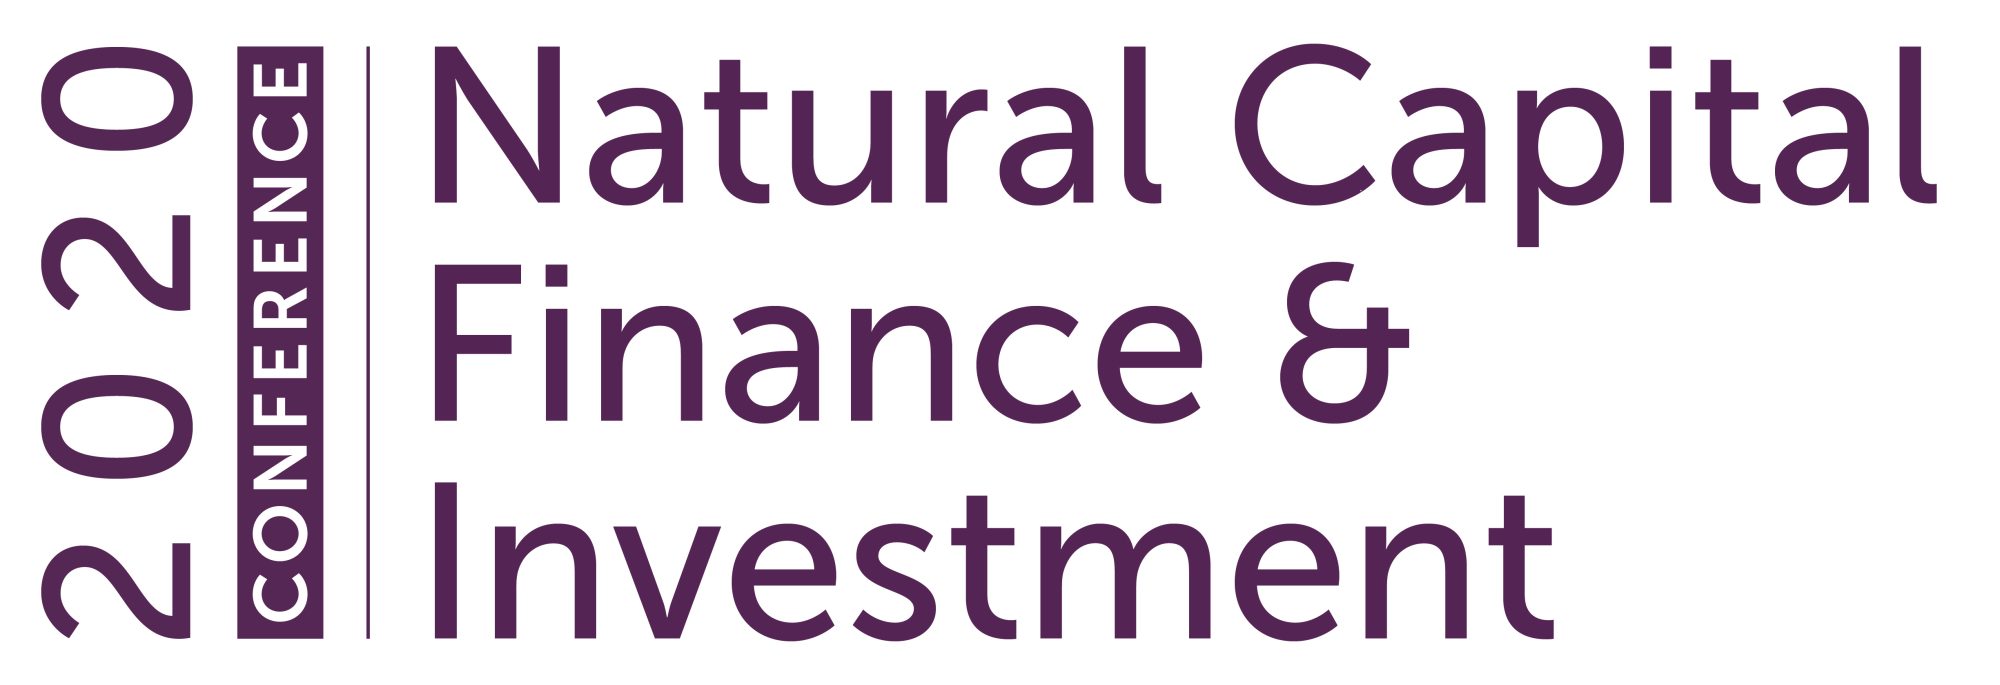 Natural Capital Finance & Investment Conference Showcased Work in Scotland